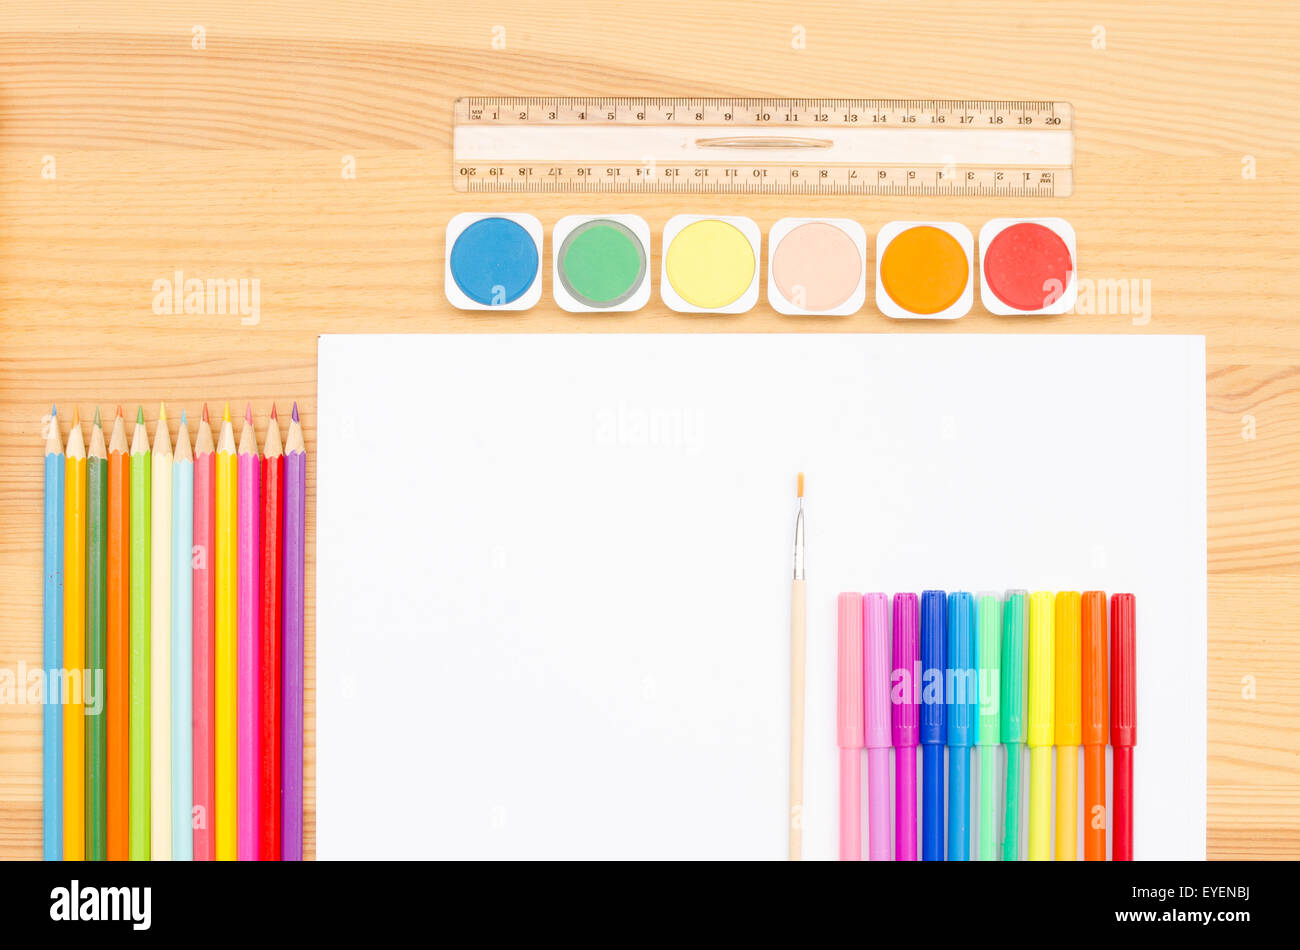 group  color school supplies on wooden background Stock Photo